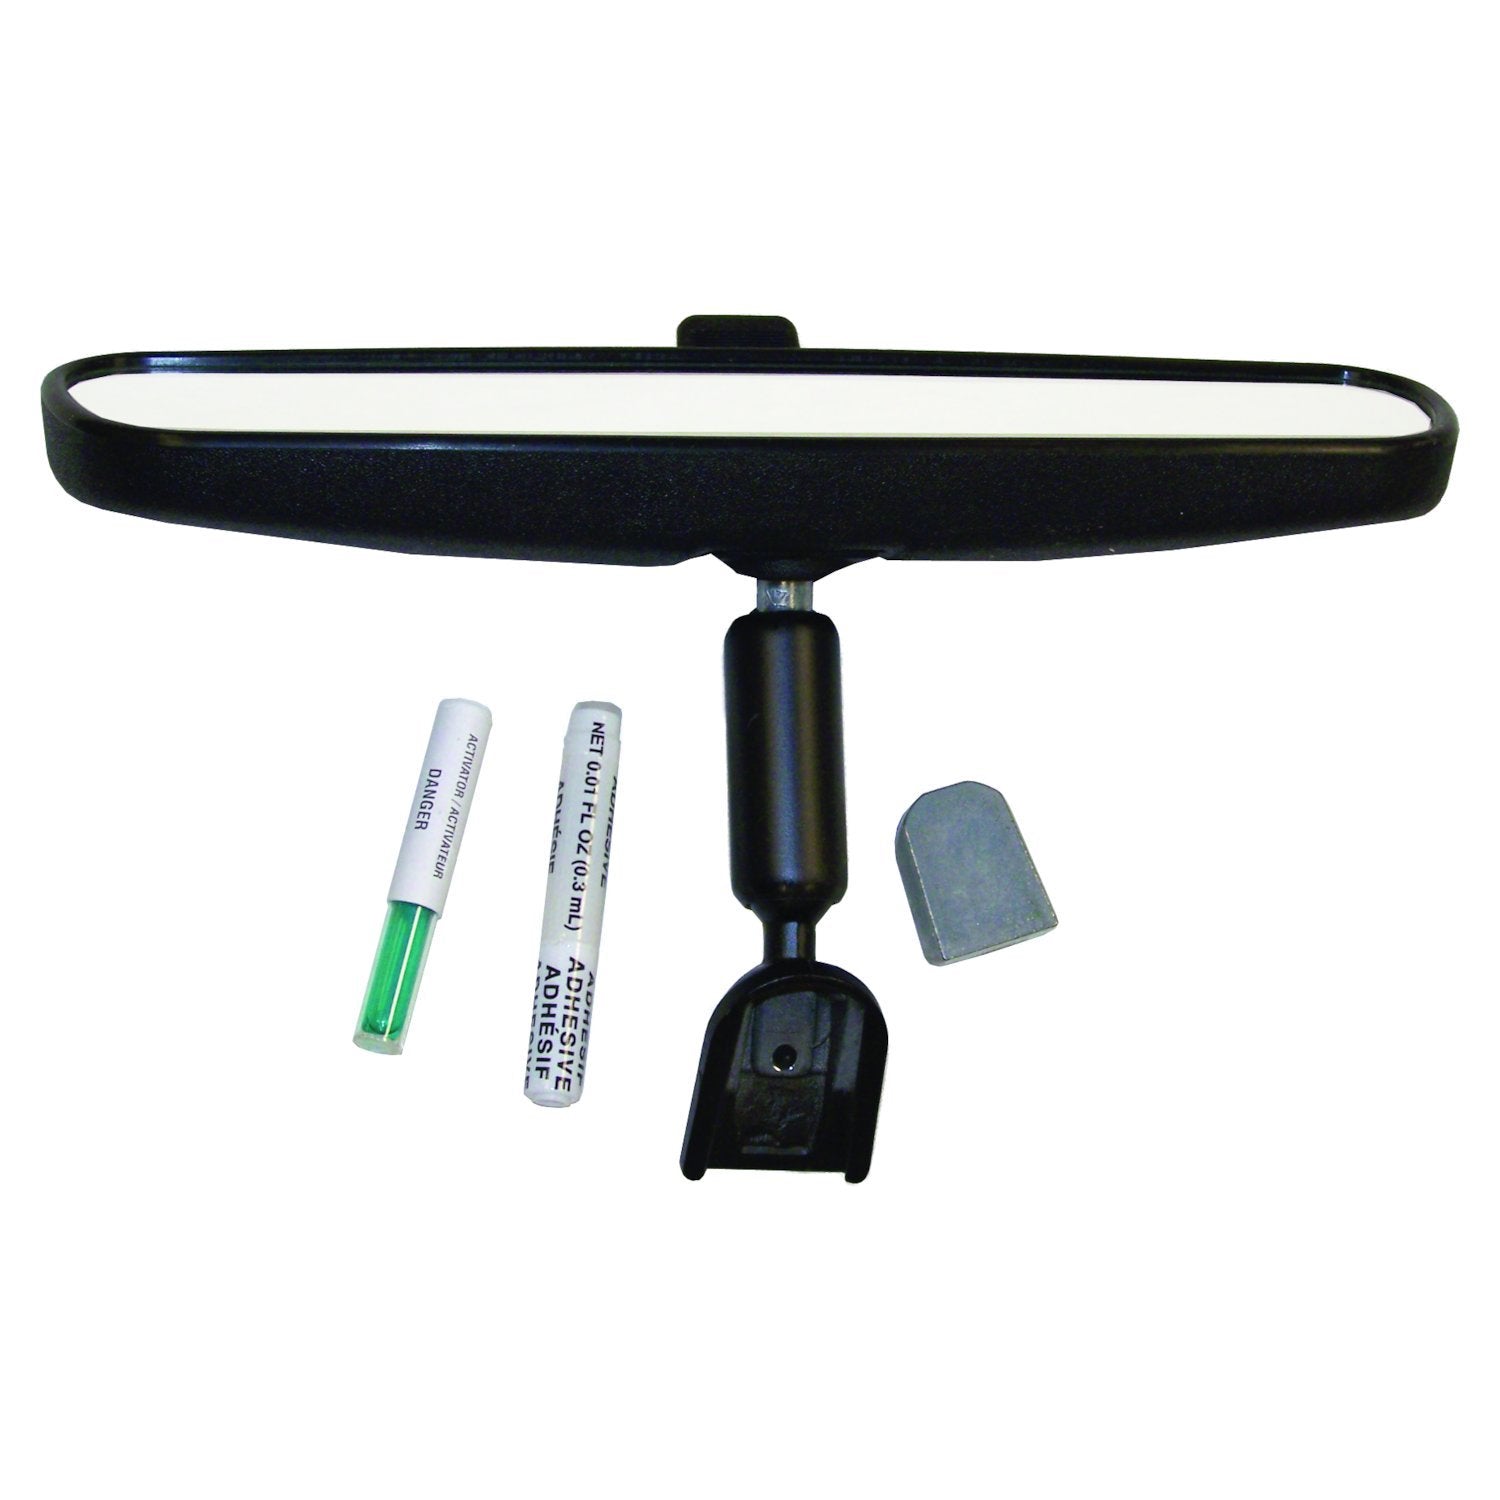 Rearview Mirror Kit, Black, Includes 9.75